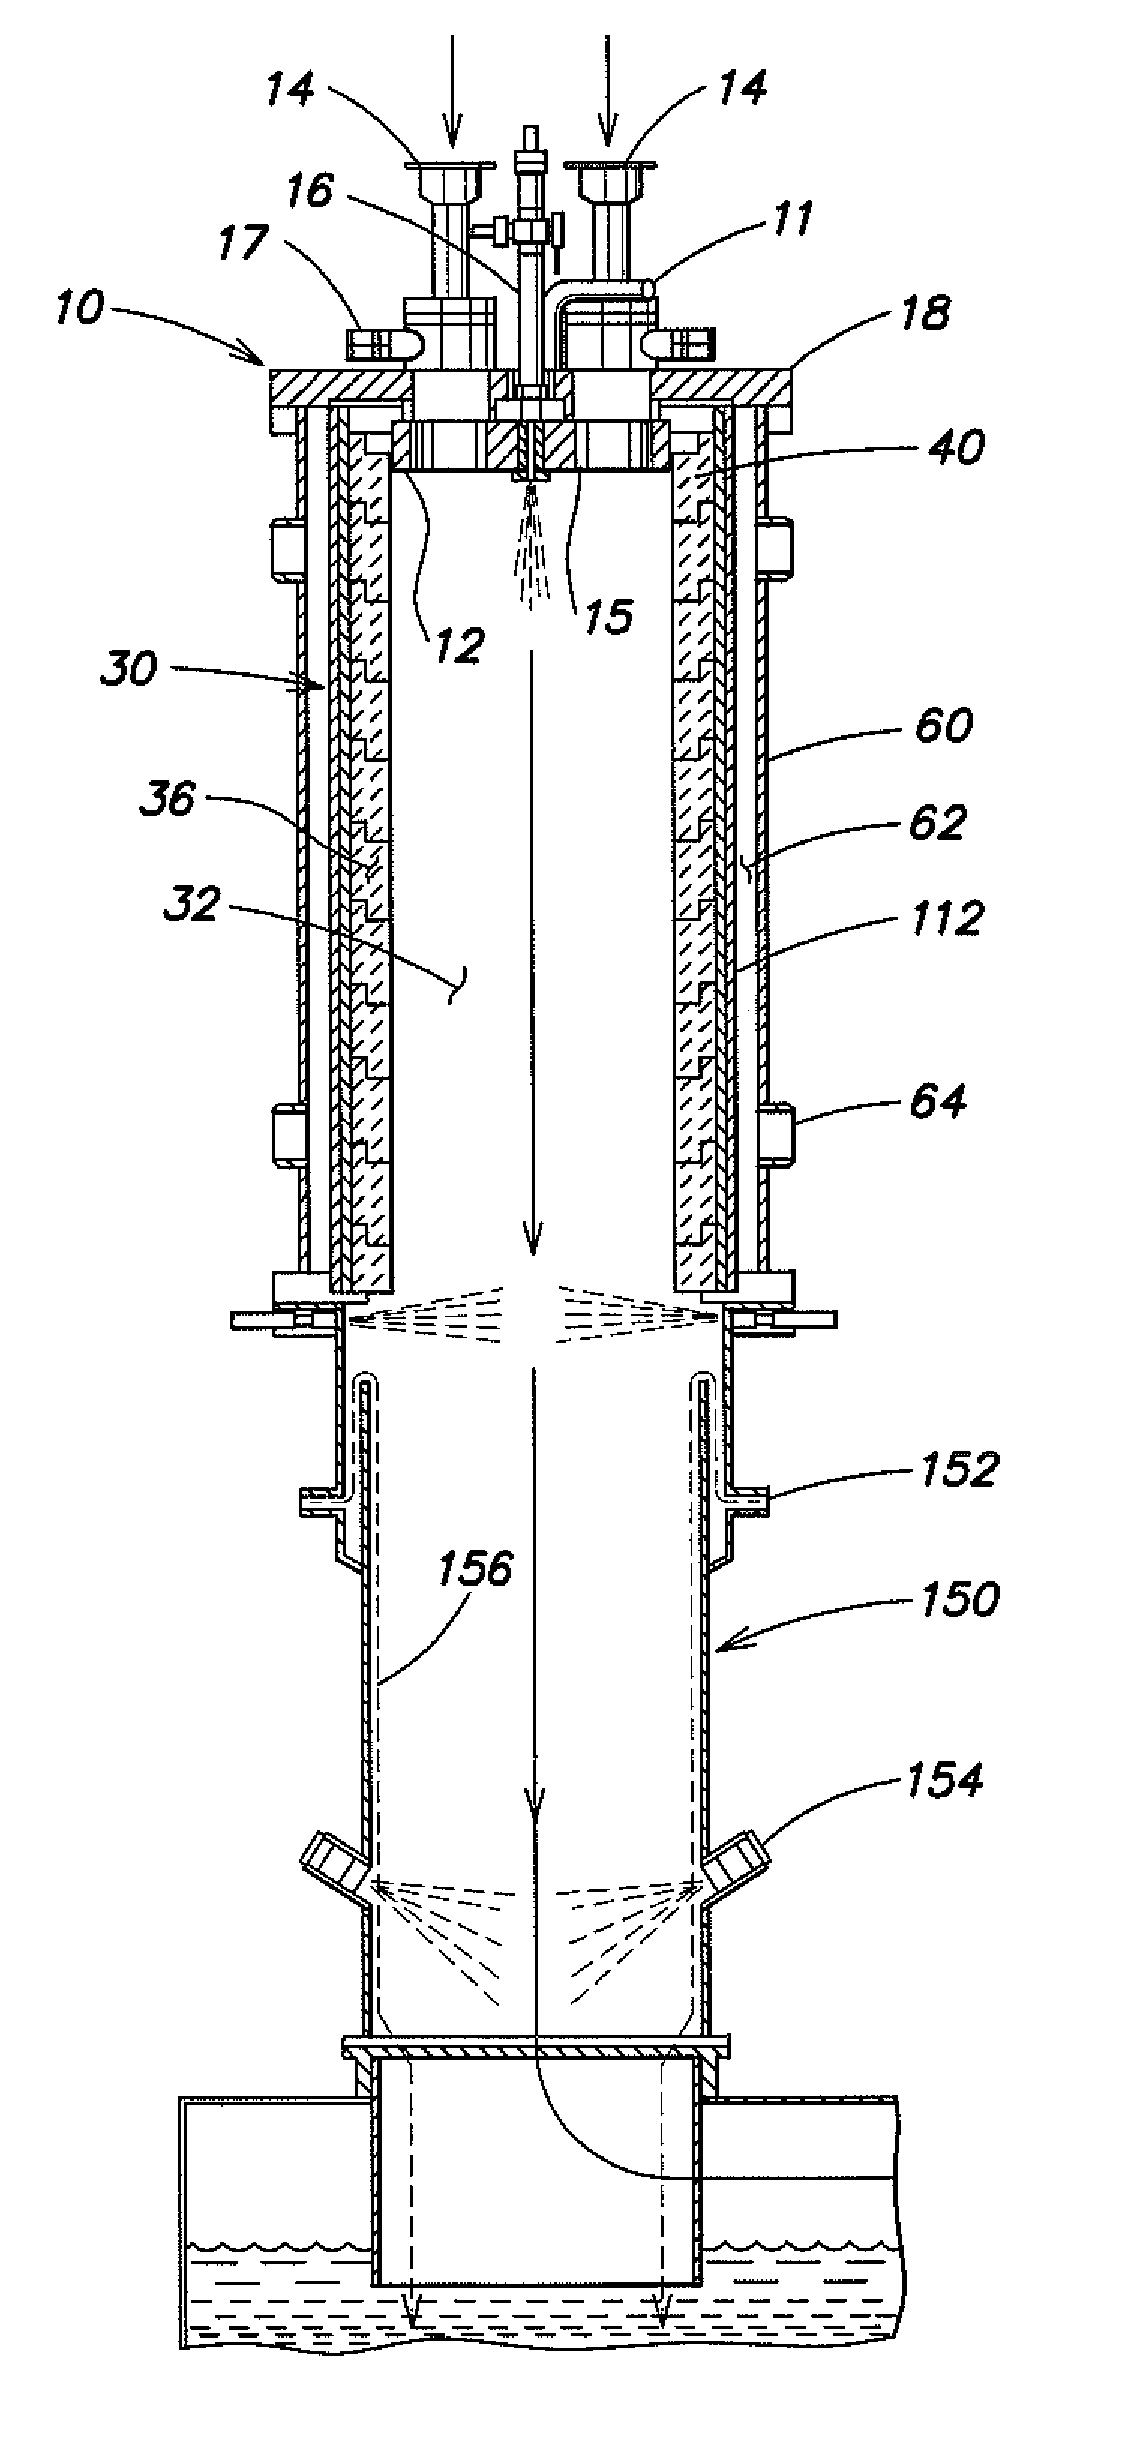 Methods and apparatus for preventing deposition of reaction products in process abatement reactors